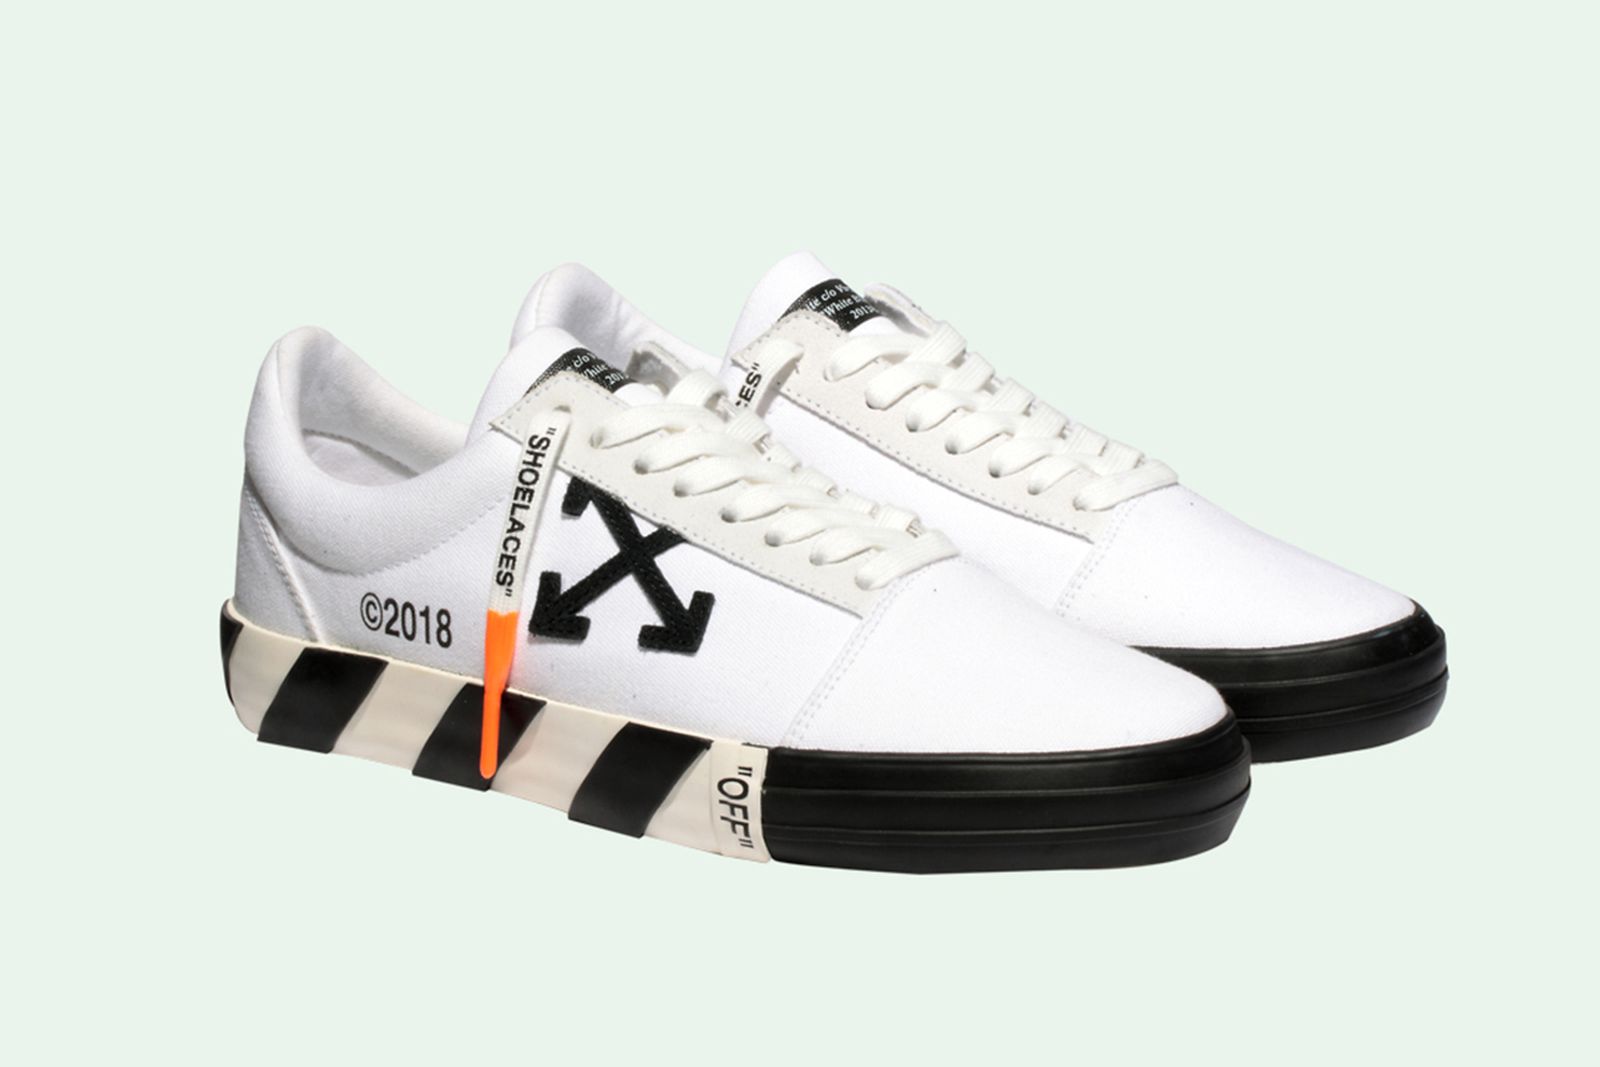 These OFF-WHITE Closest Thing to a Collab